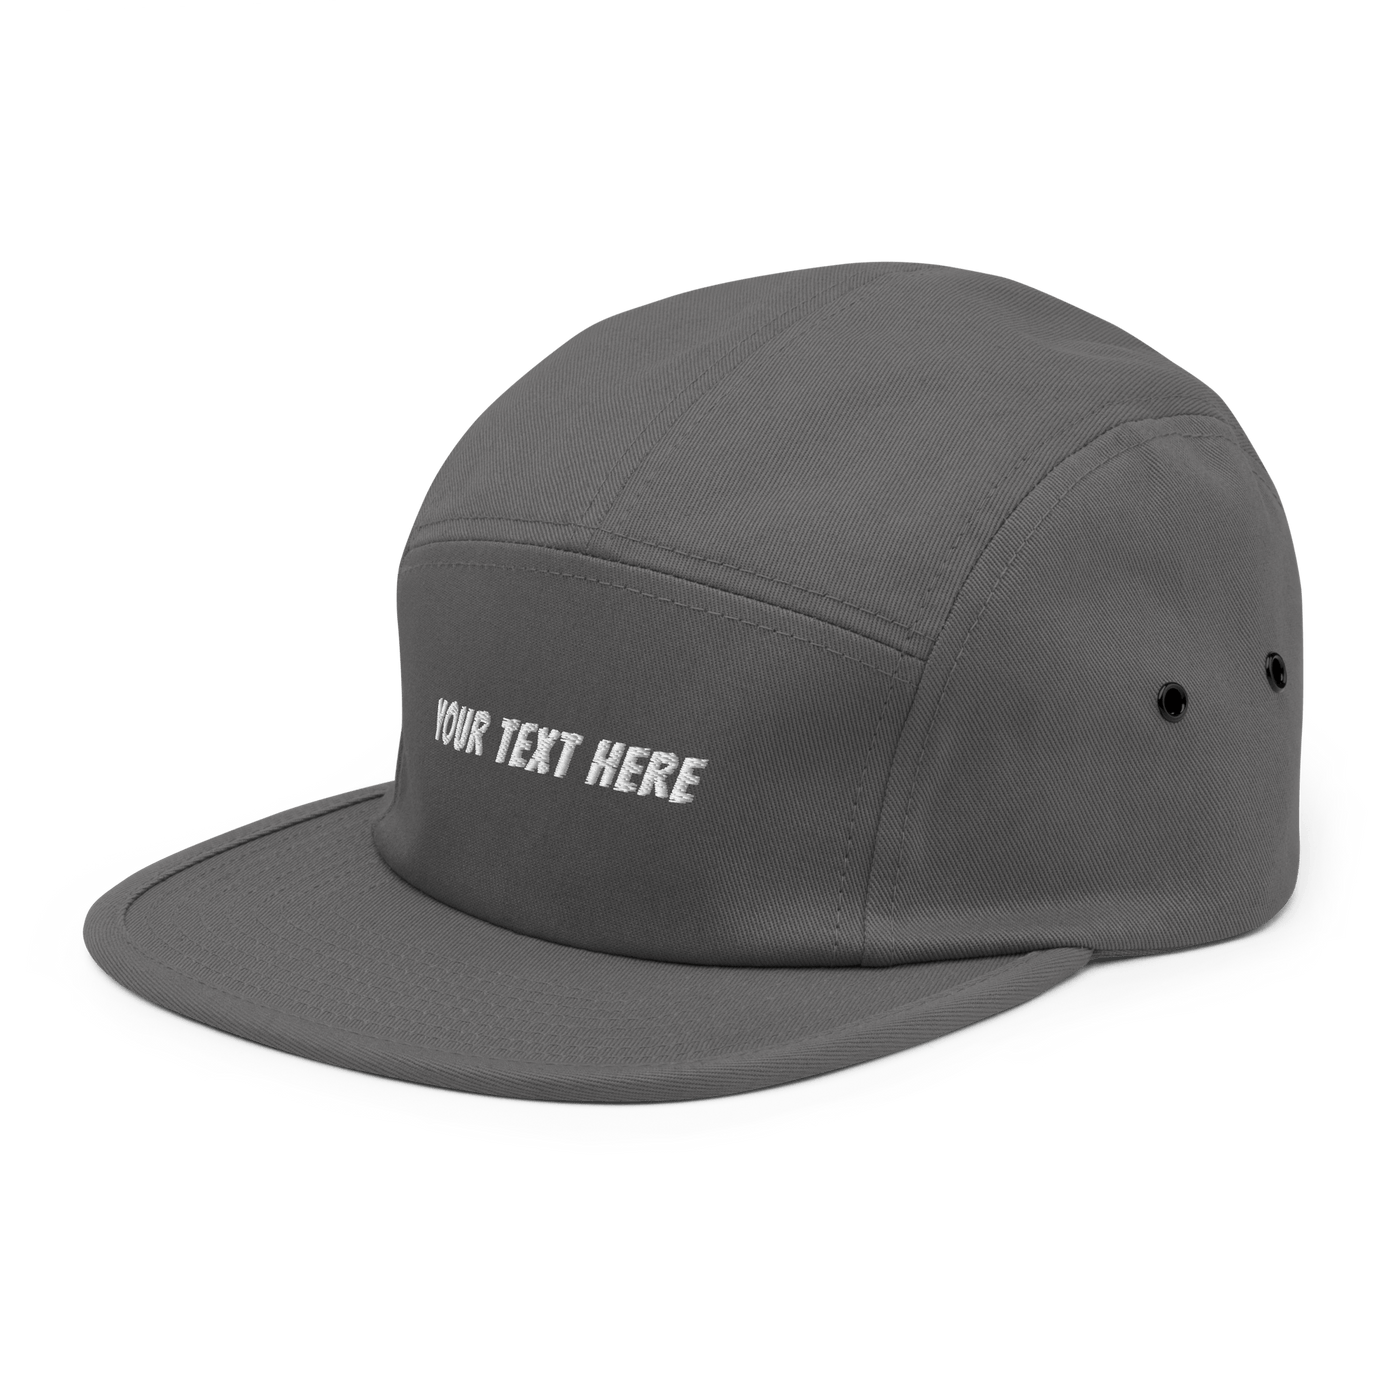 Customize Your Own Five Panel Cap - Grey - - Just Another Cap Store